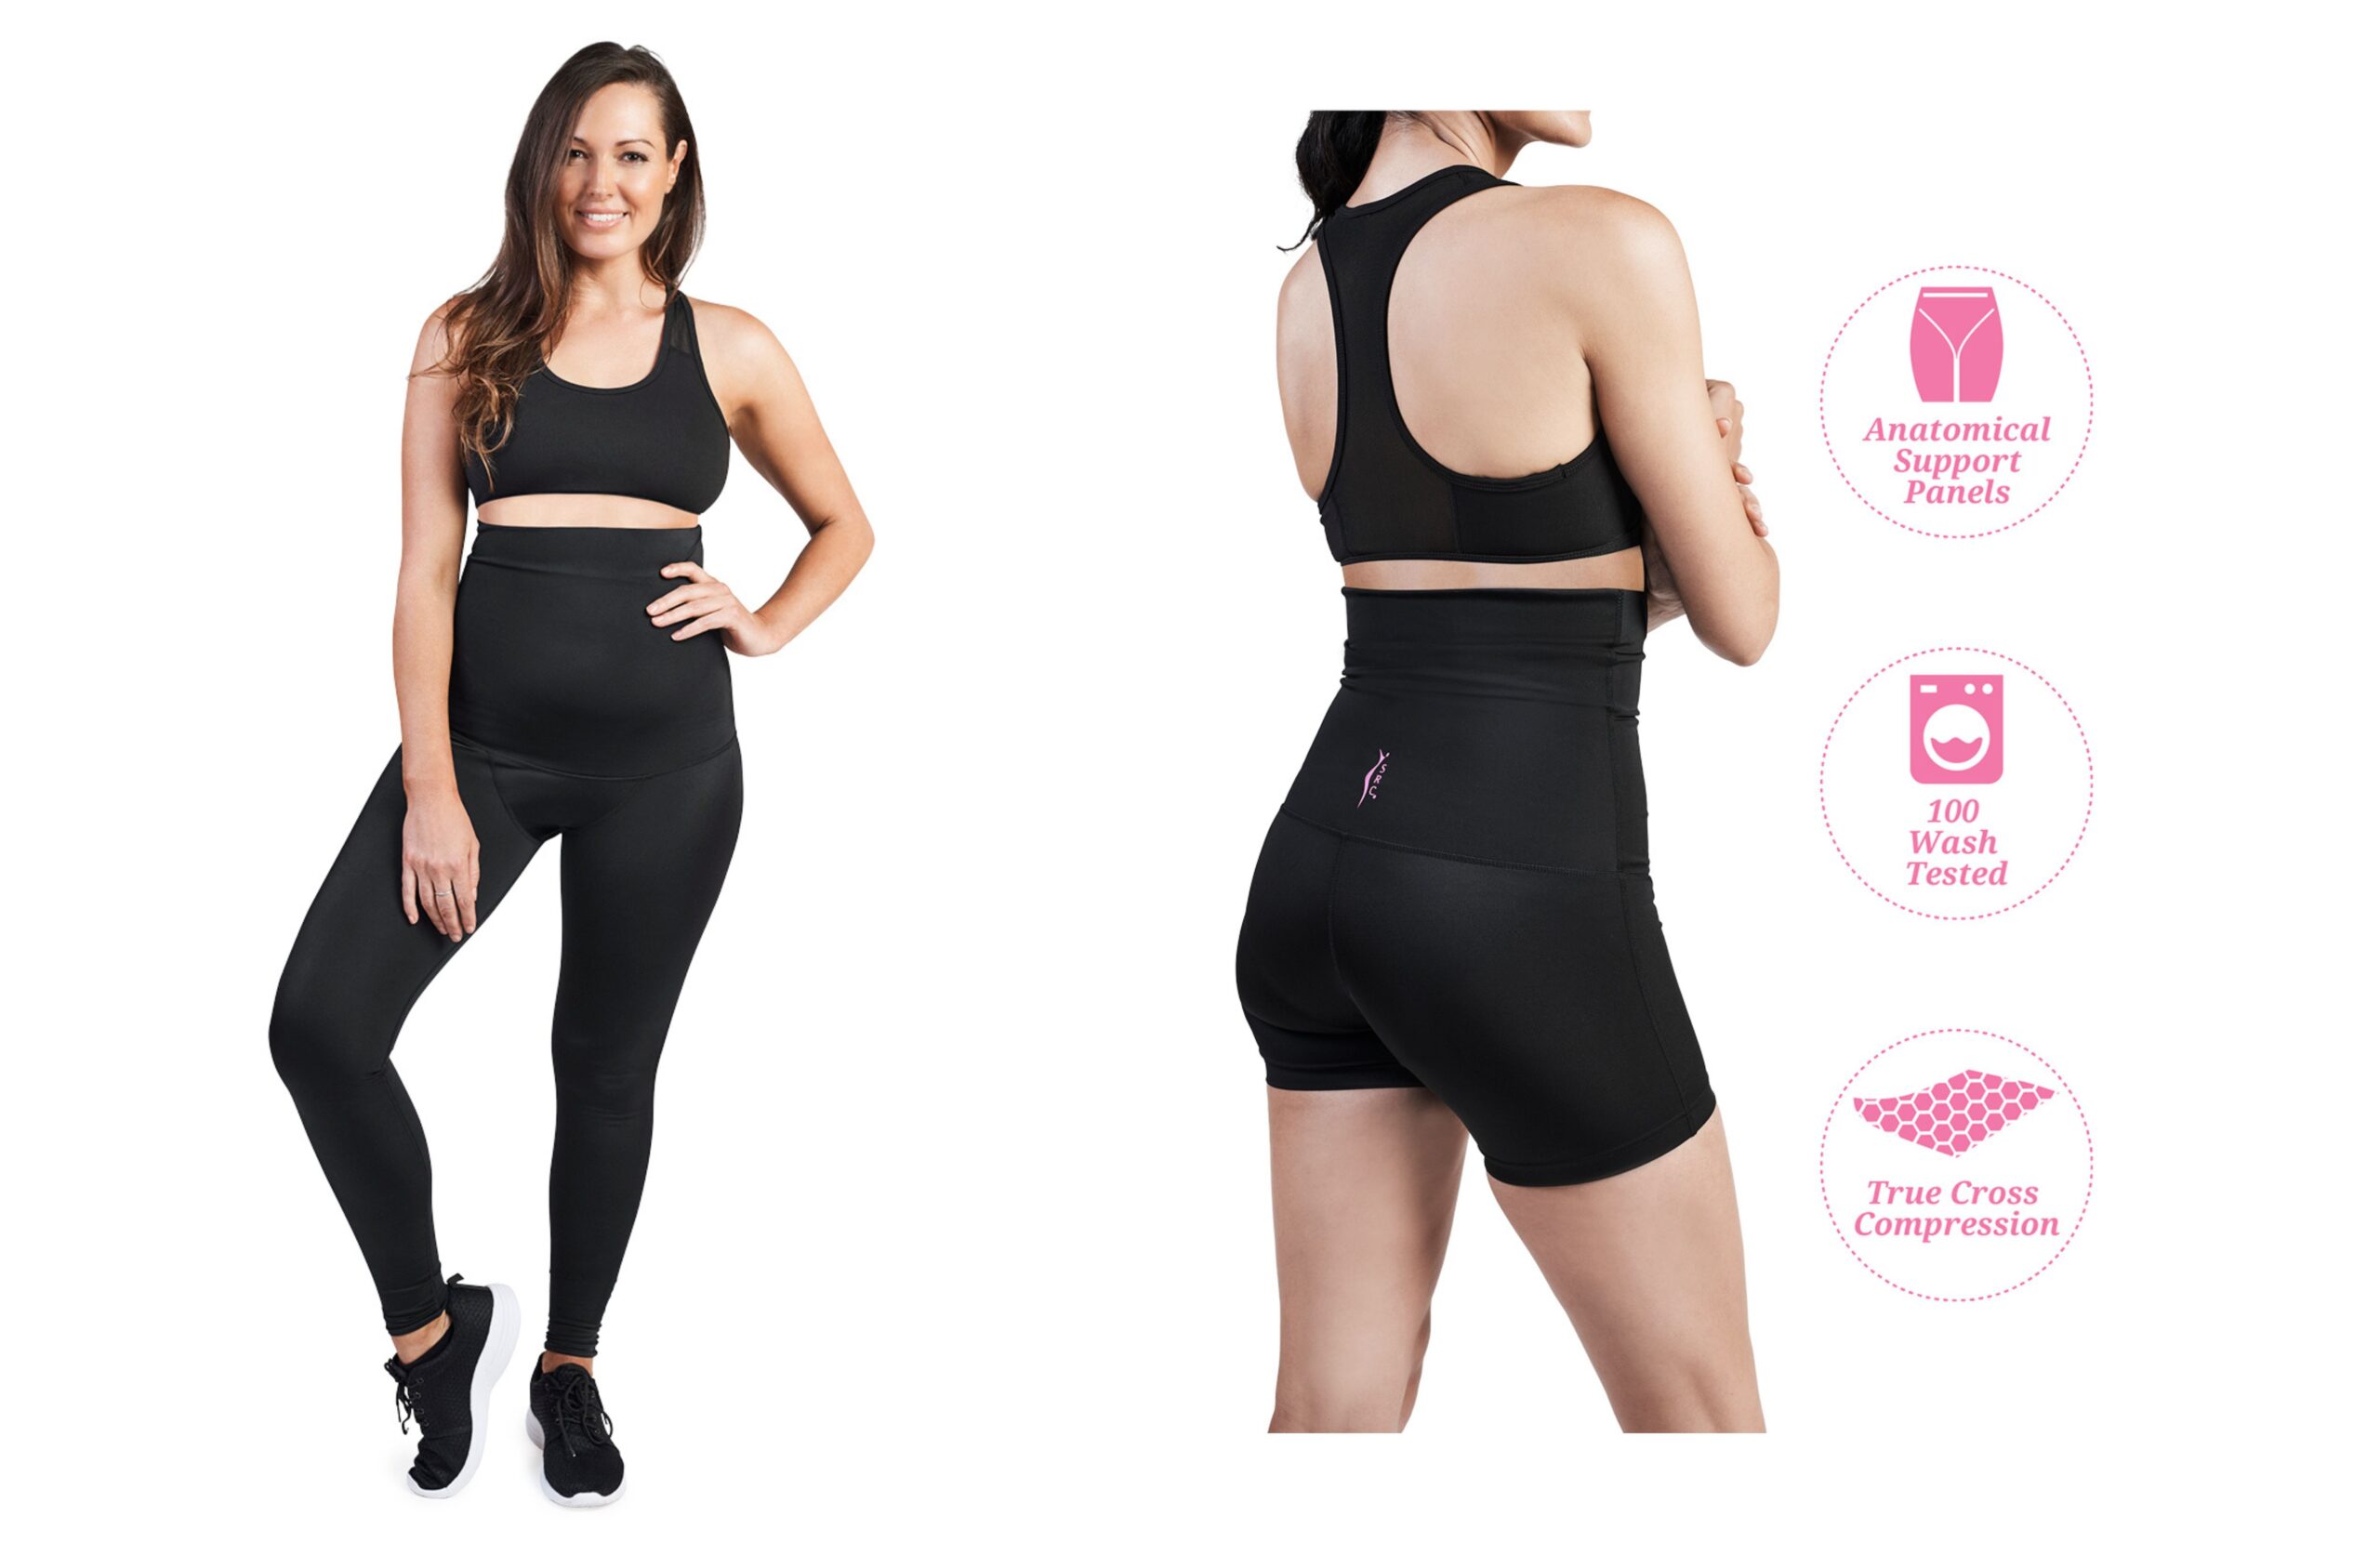 Top 5 Reasons Postpartum Compression is Different than Shapewear